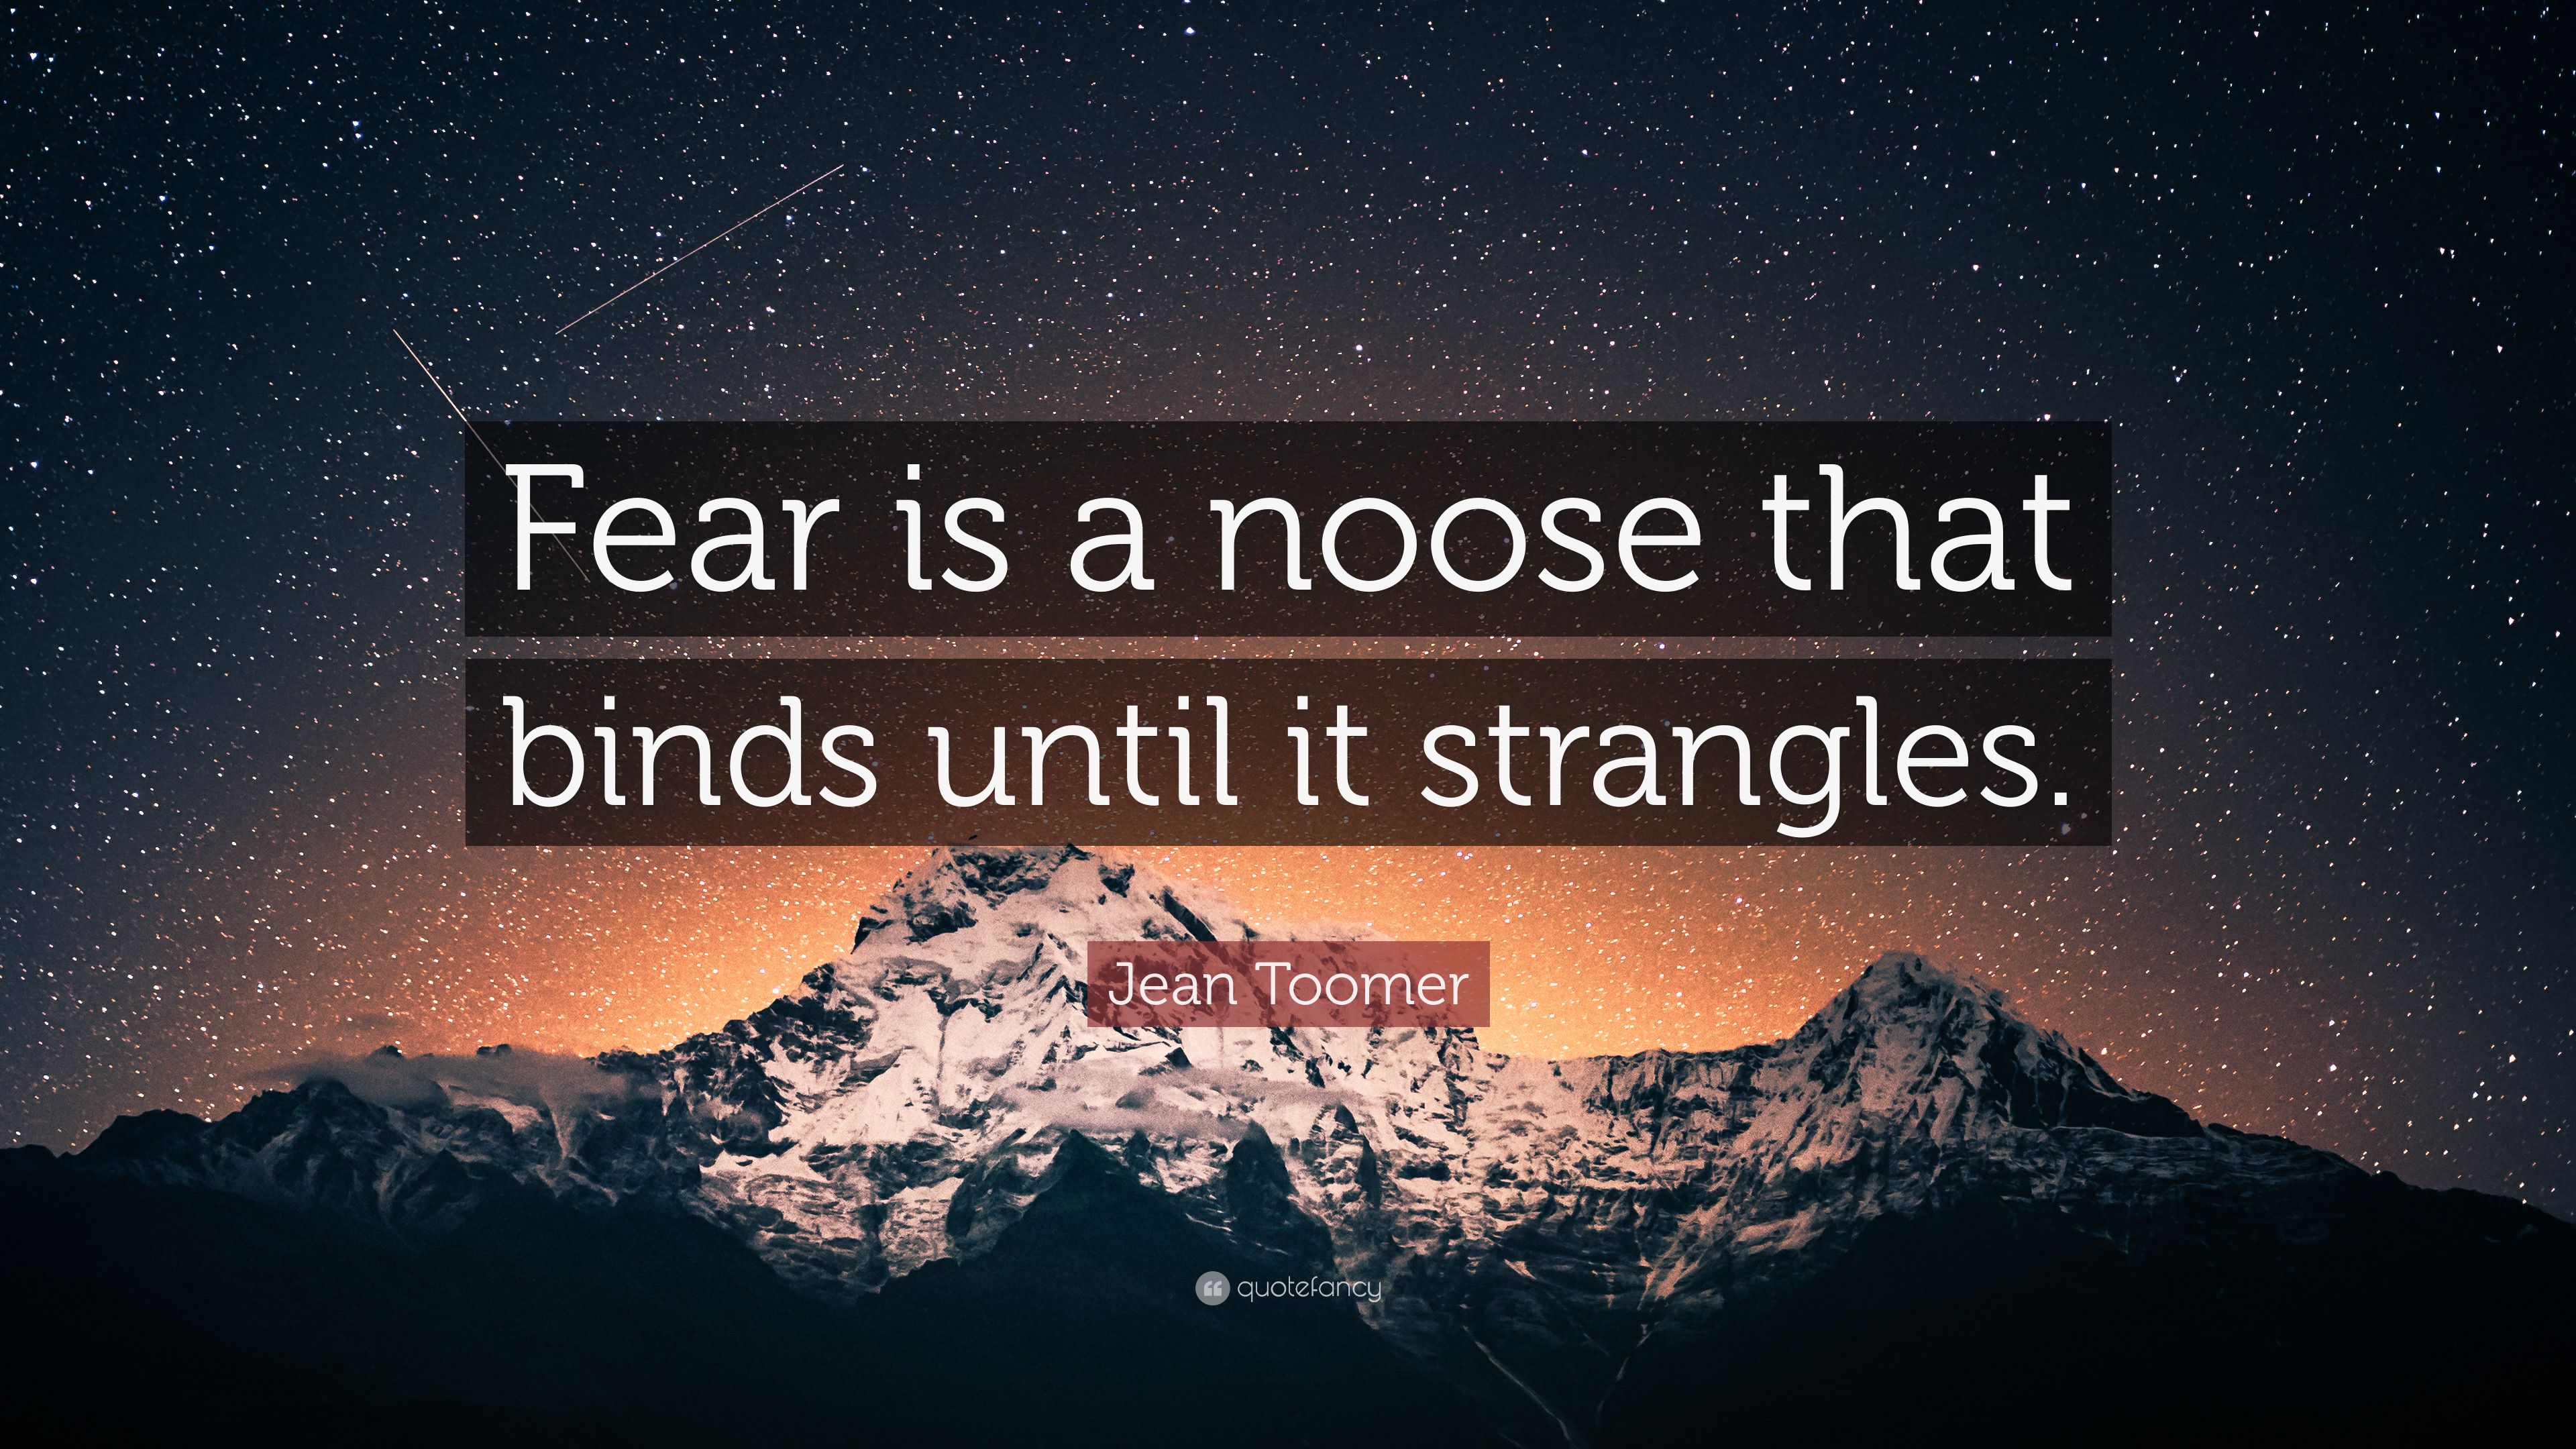 Jean Toomer Quote: “Fear is a noose that binds until it strangles